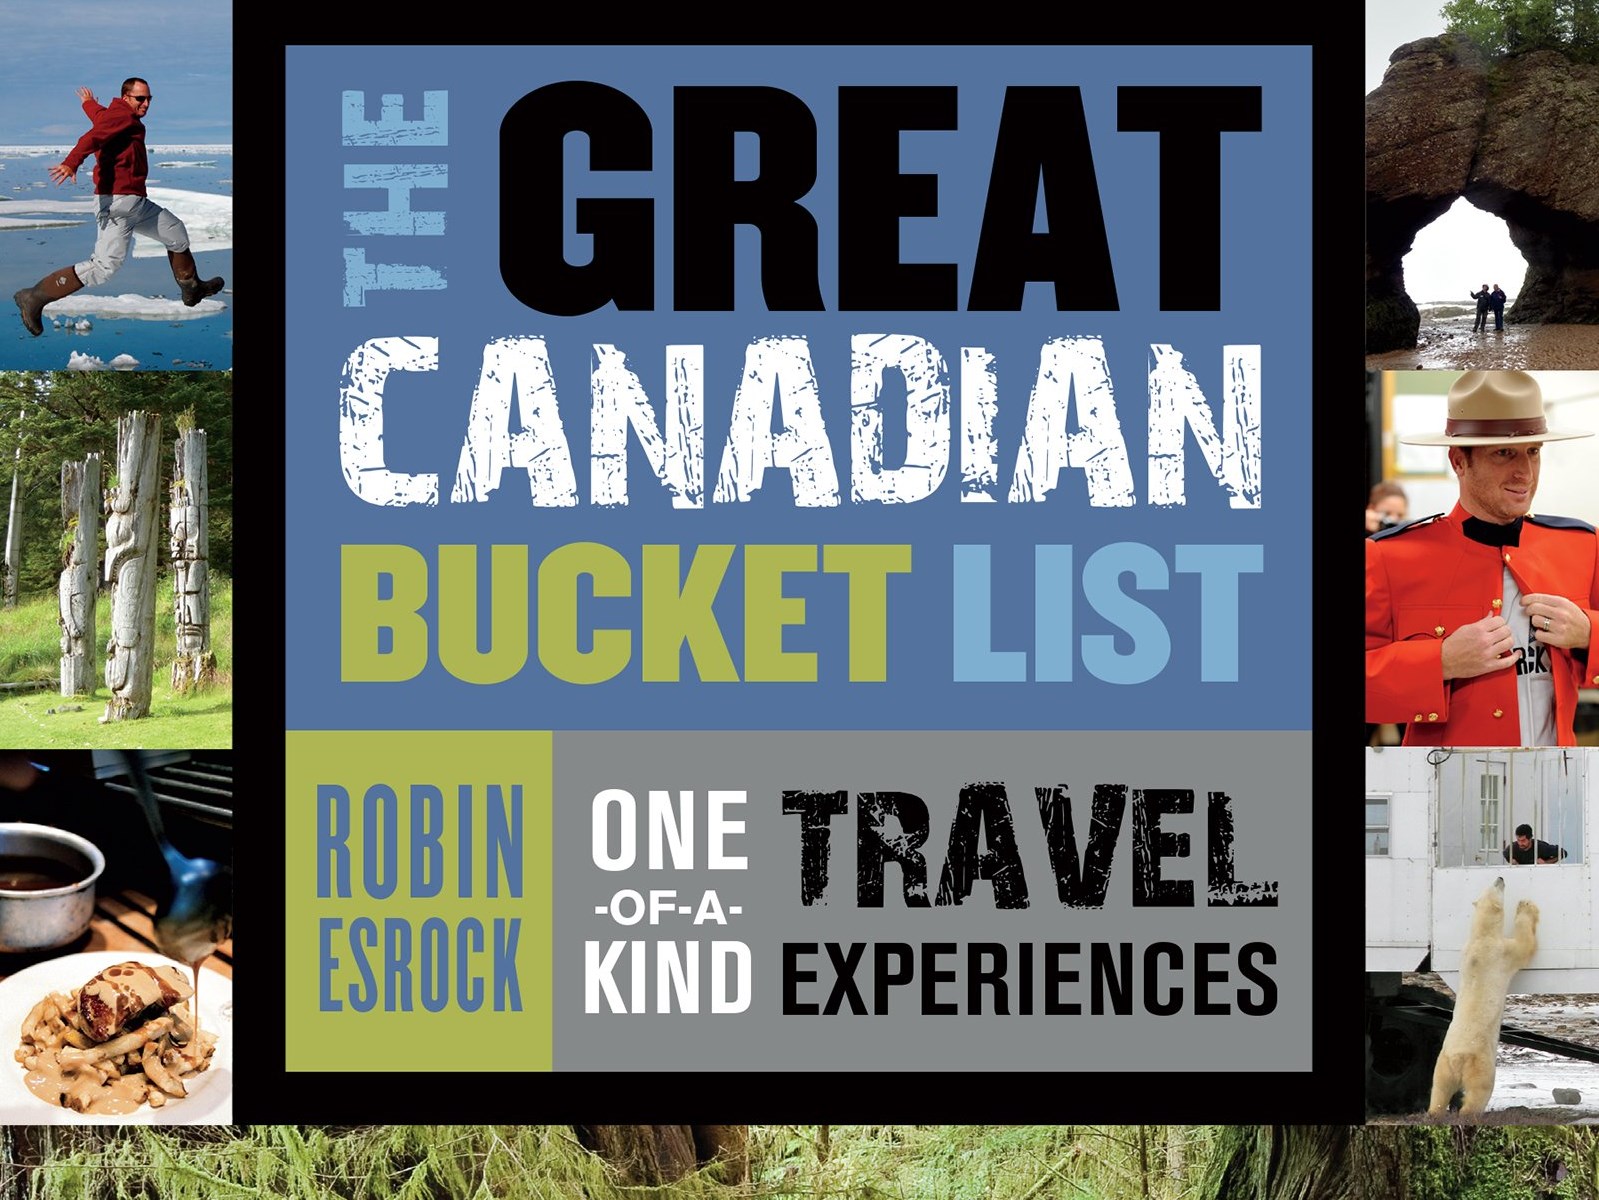 The Great Canadian Bucket List: One-of-a-Kind Travel Experiences